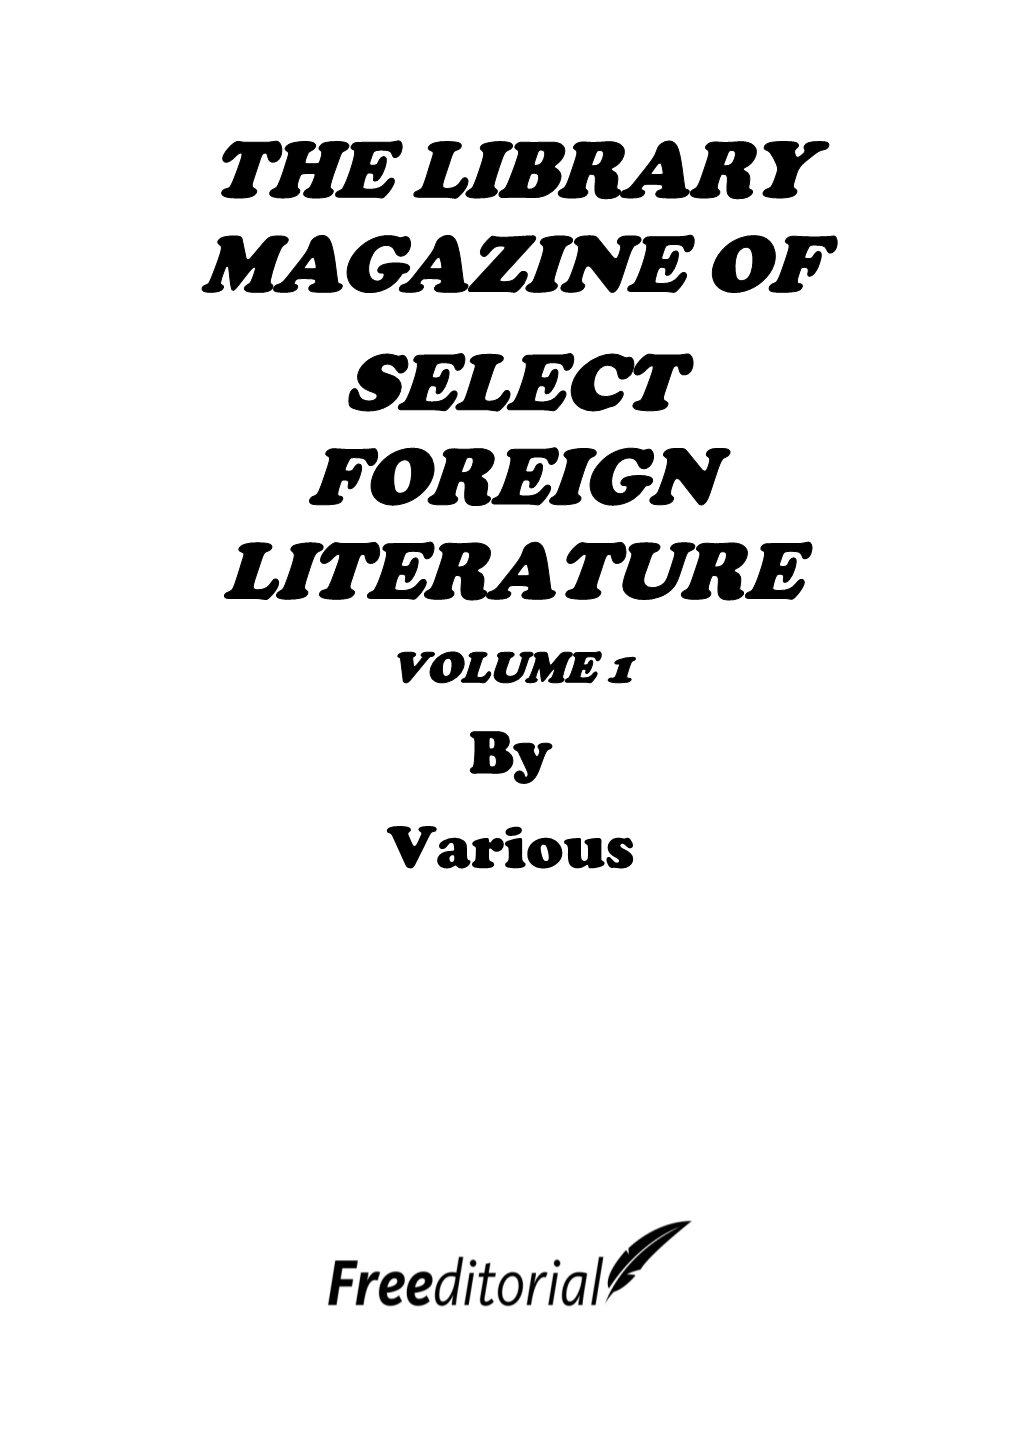 THE LIBRARY MAGAZINE of SELECT FOREIGN LITERATURE VOLUME 1 by Various